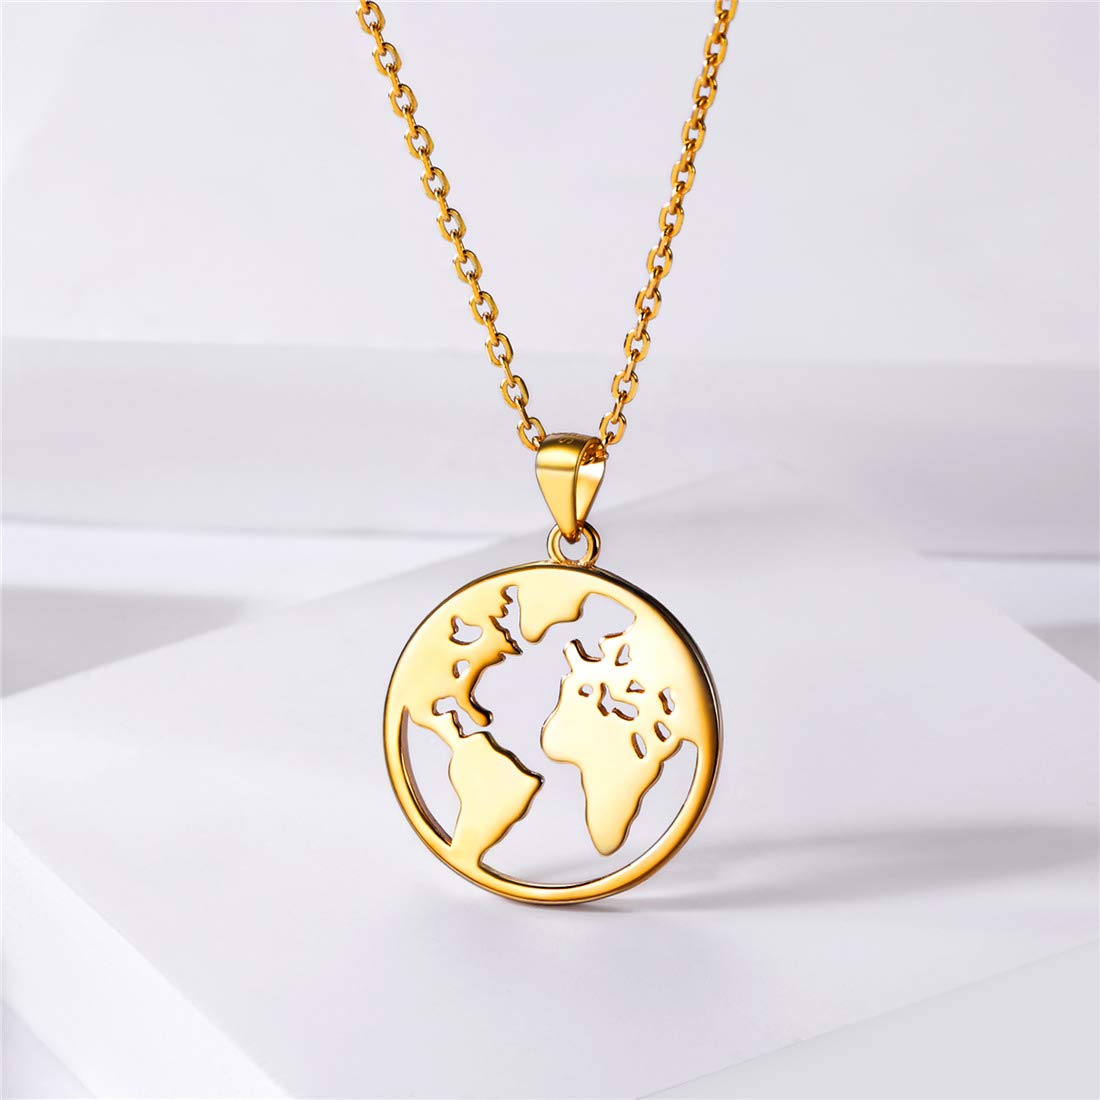 Earth Necklace 18K Gold Plated Sterling Silver World Map